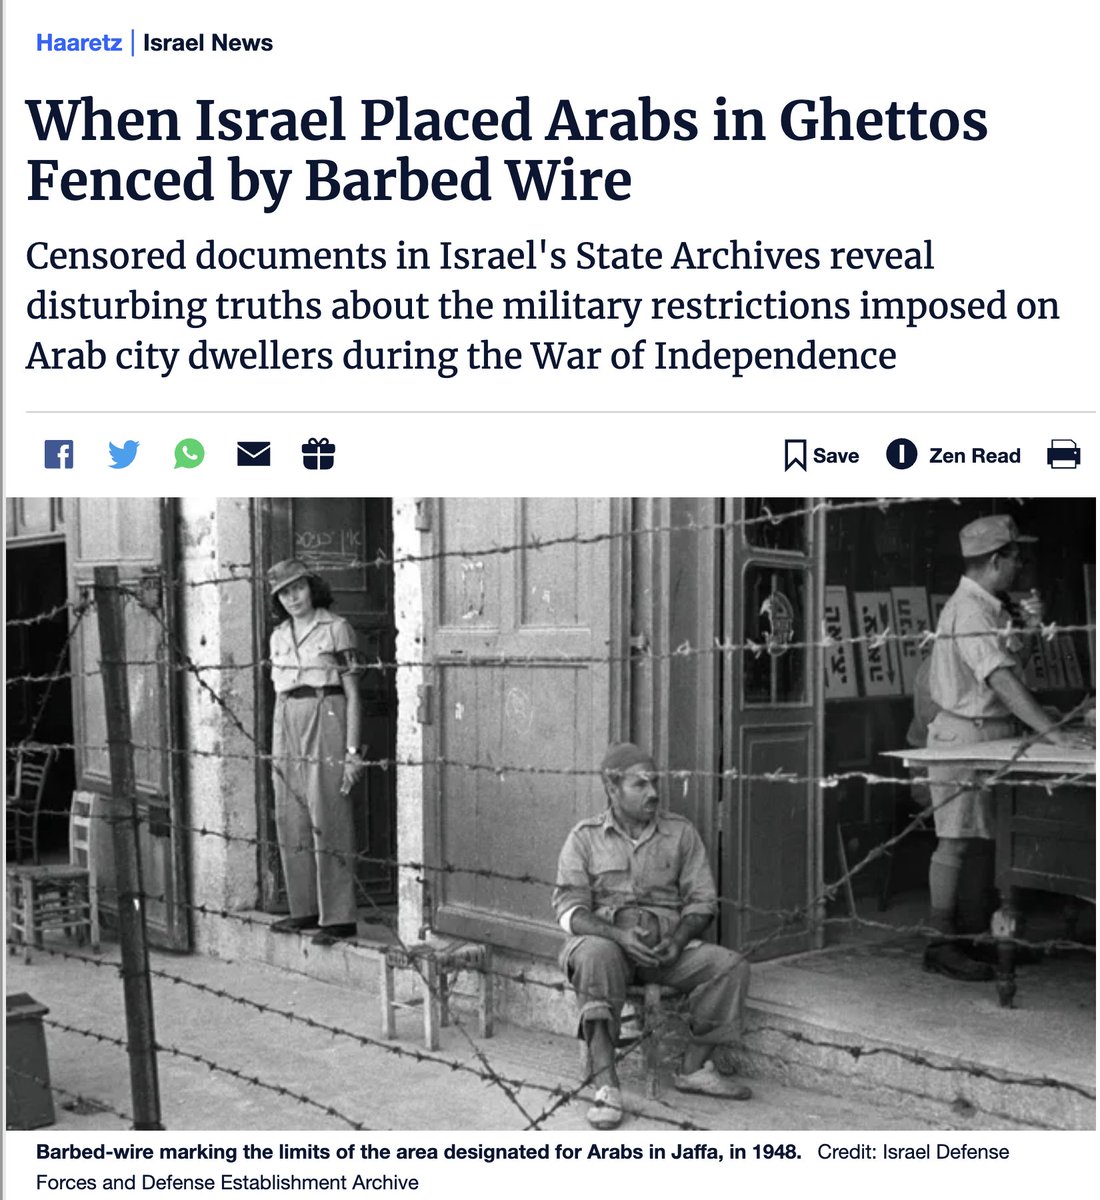 After Israel was founded in 1948 & the war was over, Israel caged Palestinians whom they failed to ethnically cleanse in overcrowded 'Ghettos' & 'Concentration Camps' (Israeli gov's words) They starved, humiliated & terrorized them & deported ~40,000 Palestinians in 7 years🧵